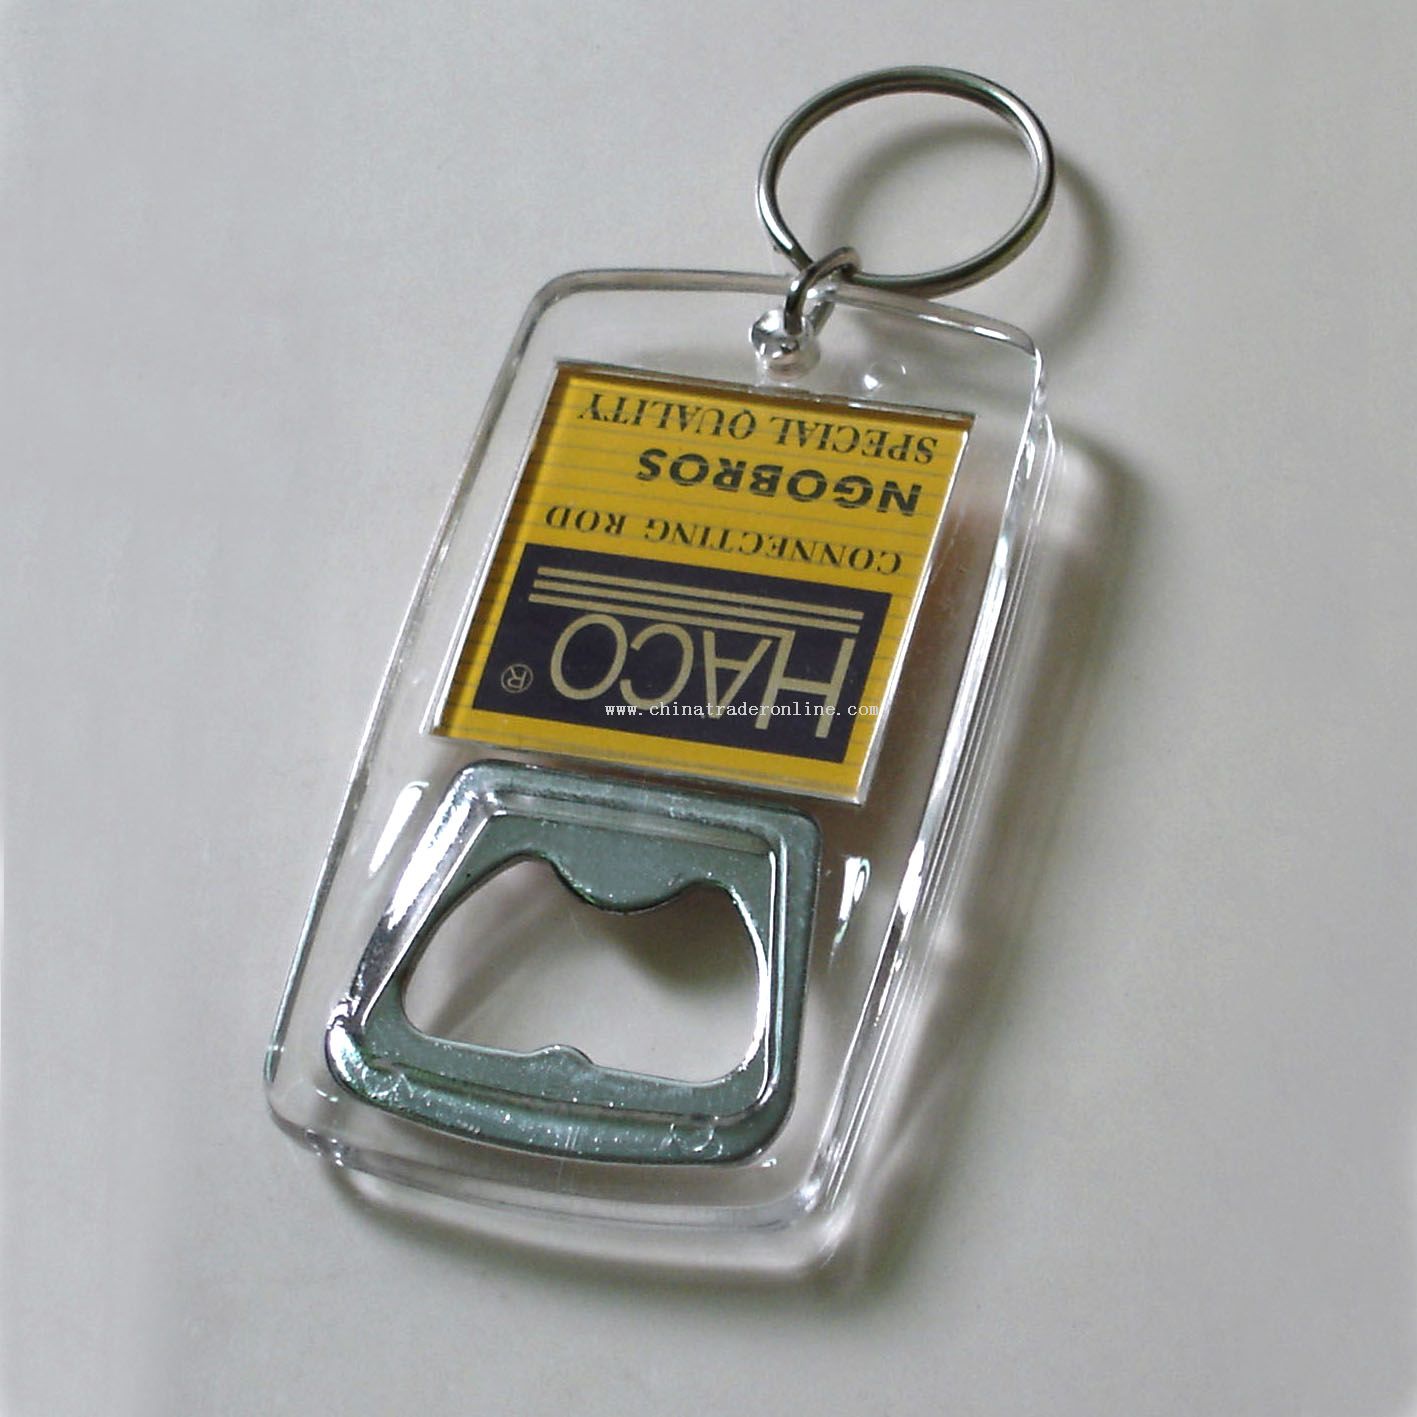 Acrylic opener with cover from China